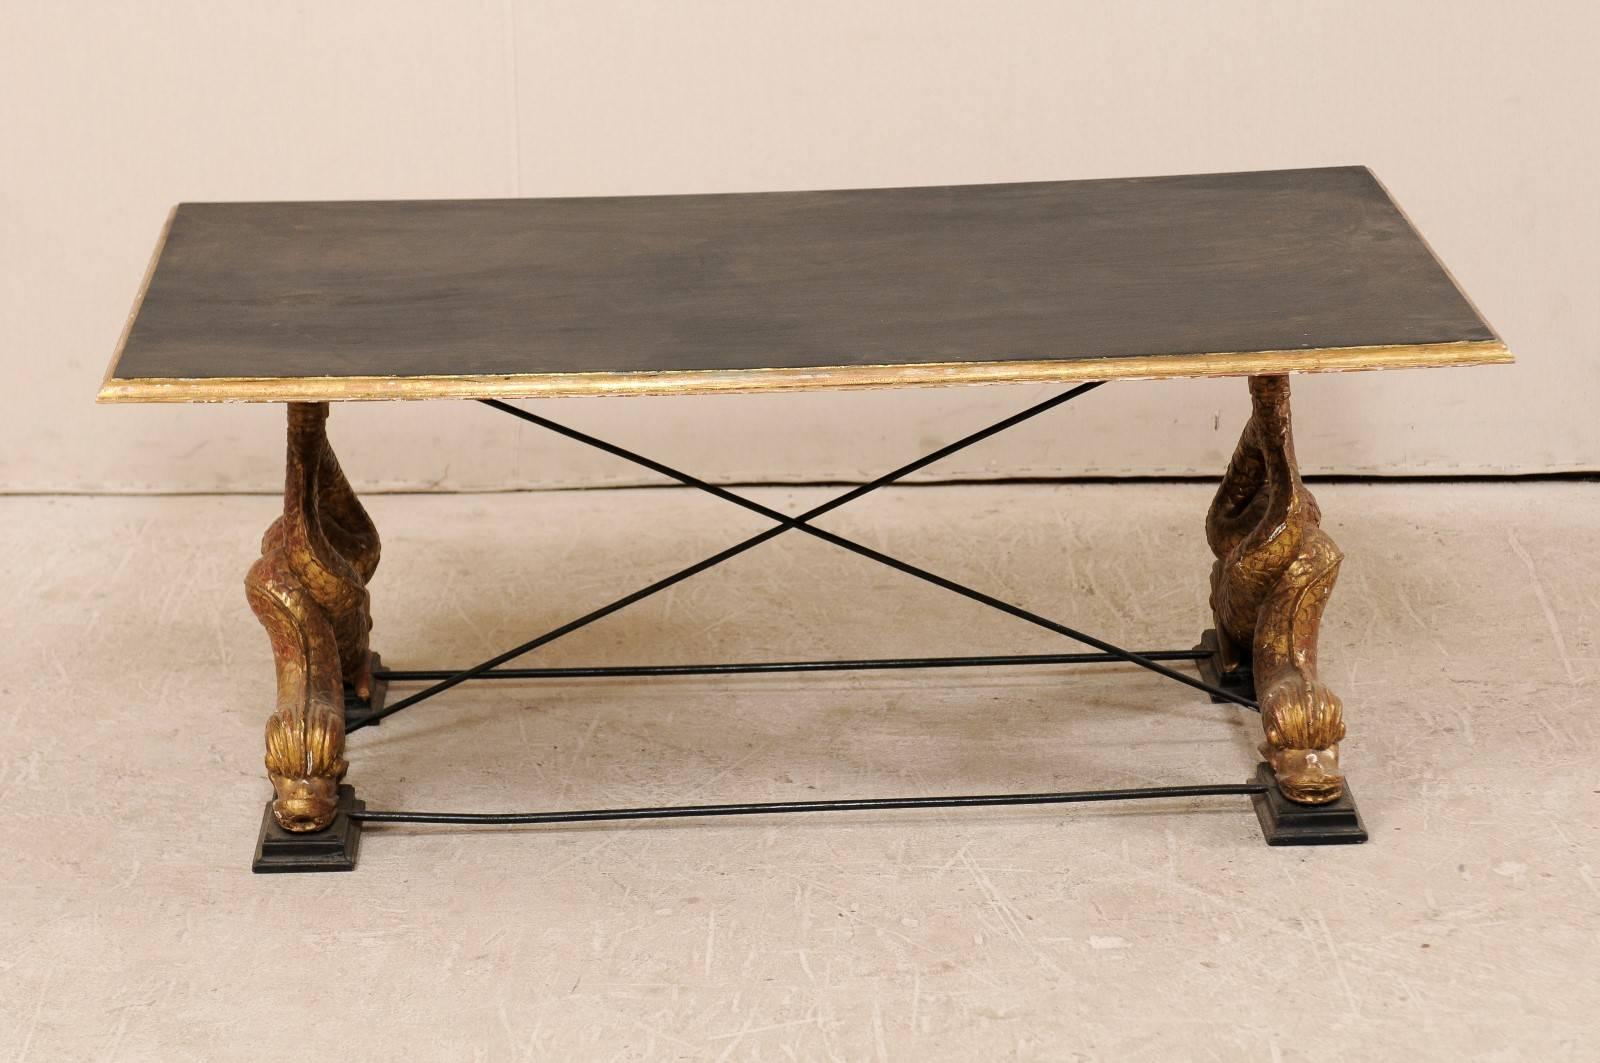 20th Century Italian Mid-Century Coffee Table with Carved Mythological Creature Fish Legs